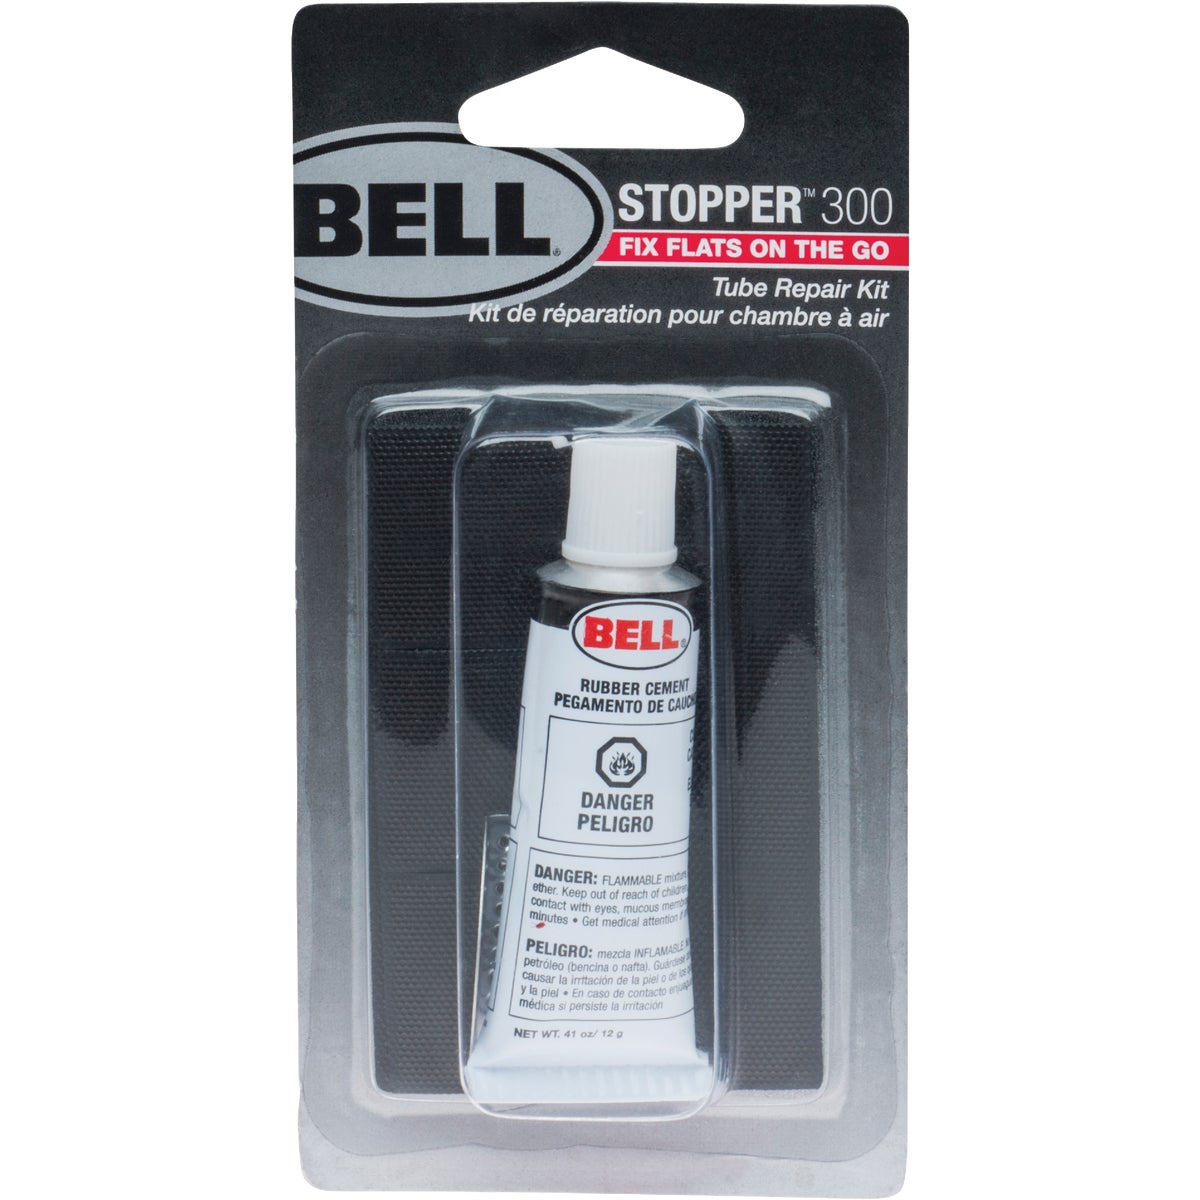 Item 817735, The Bell Stopper 300 patch kit contains 12 premium glueless patches and a 